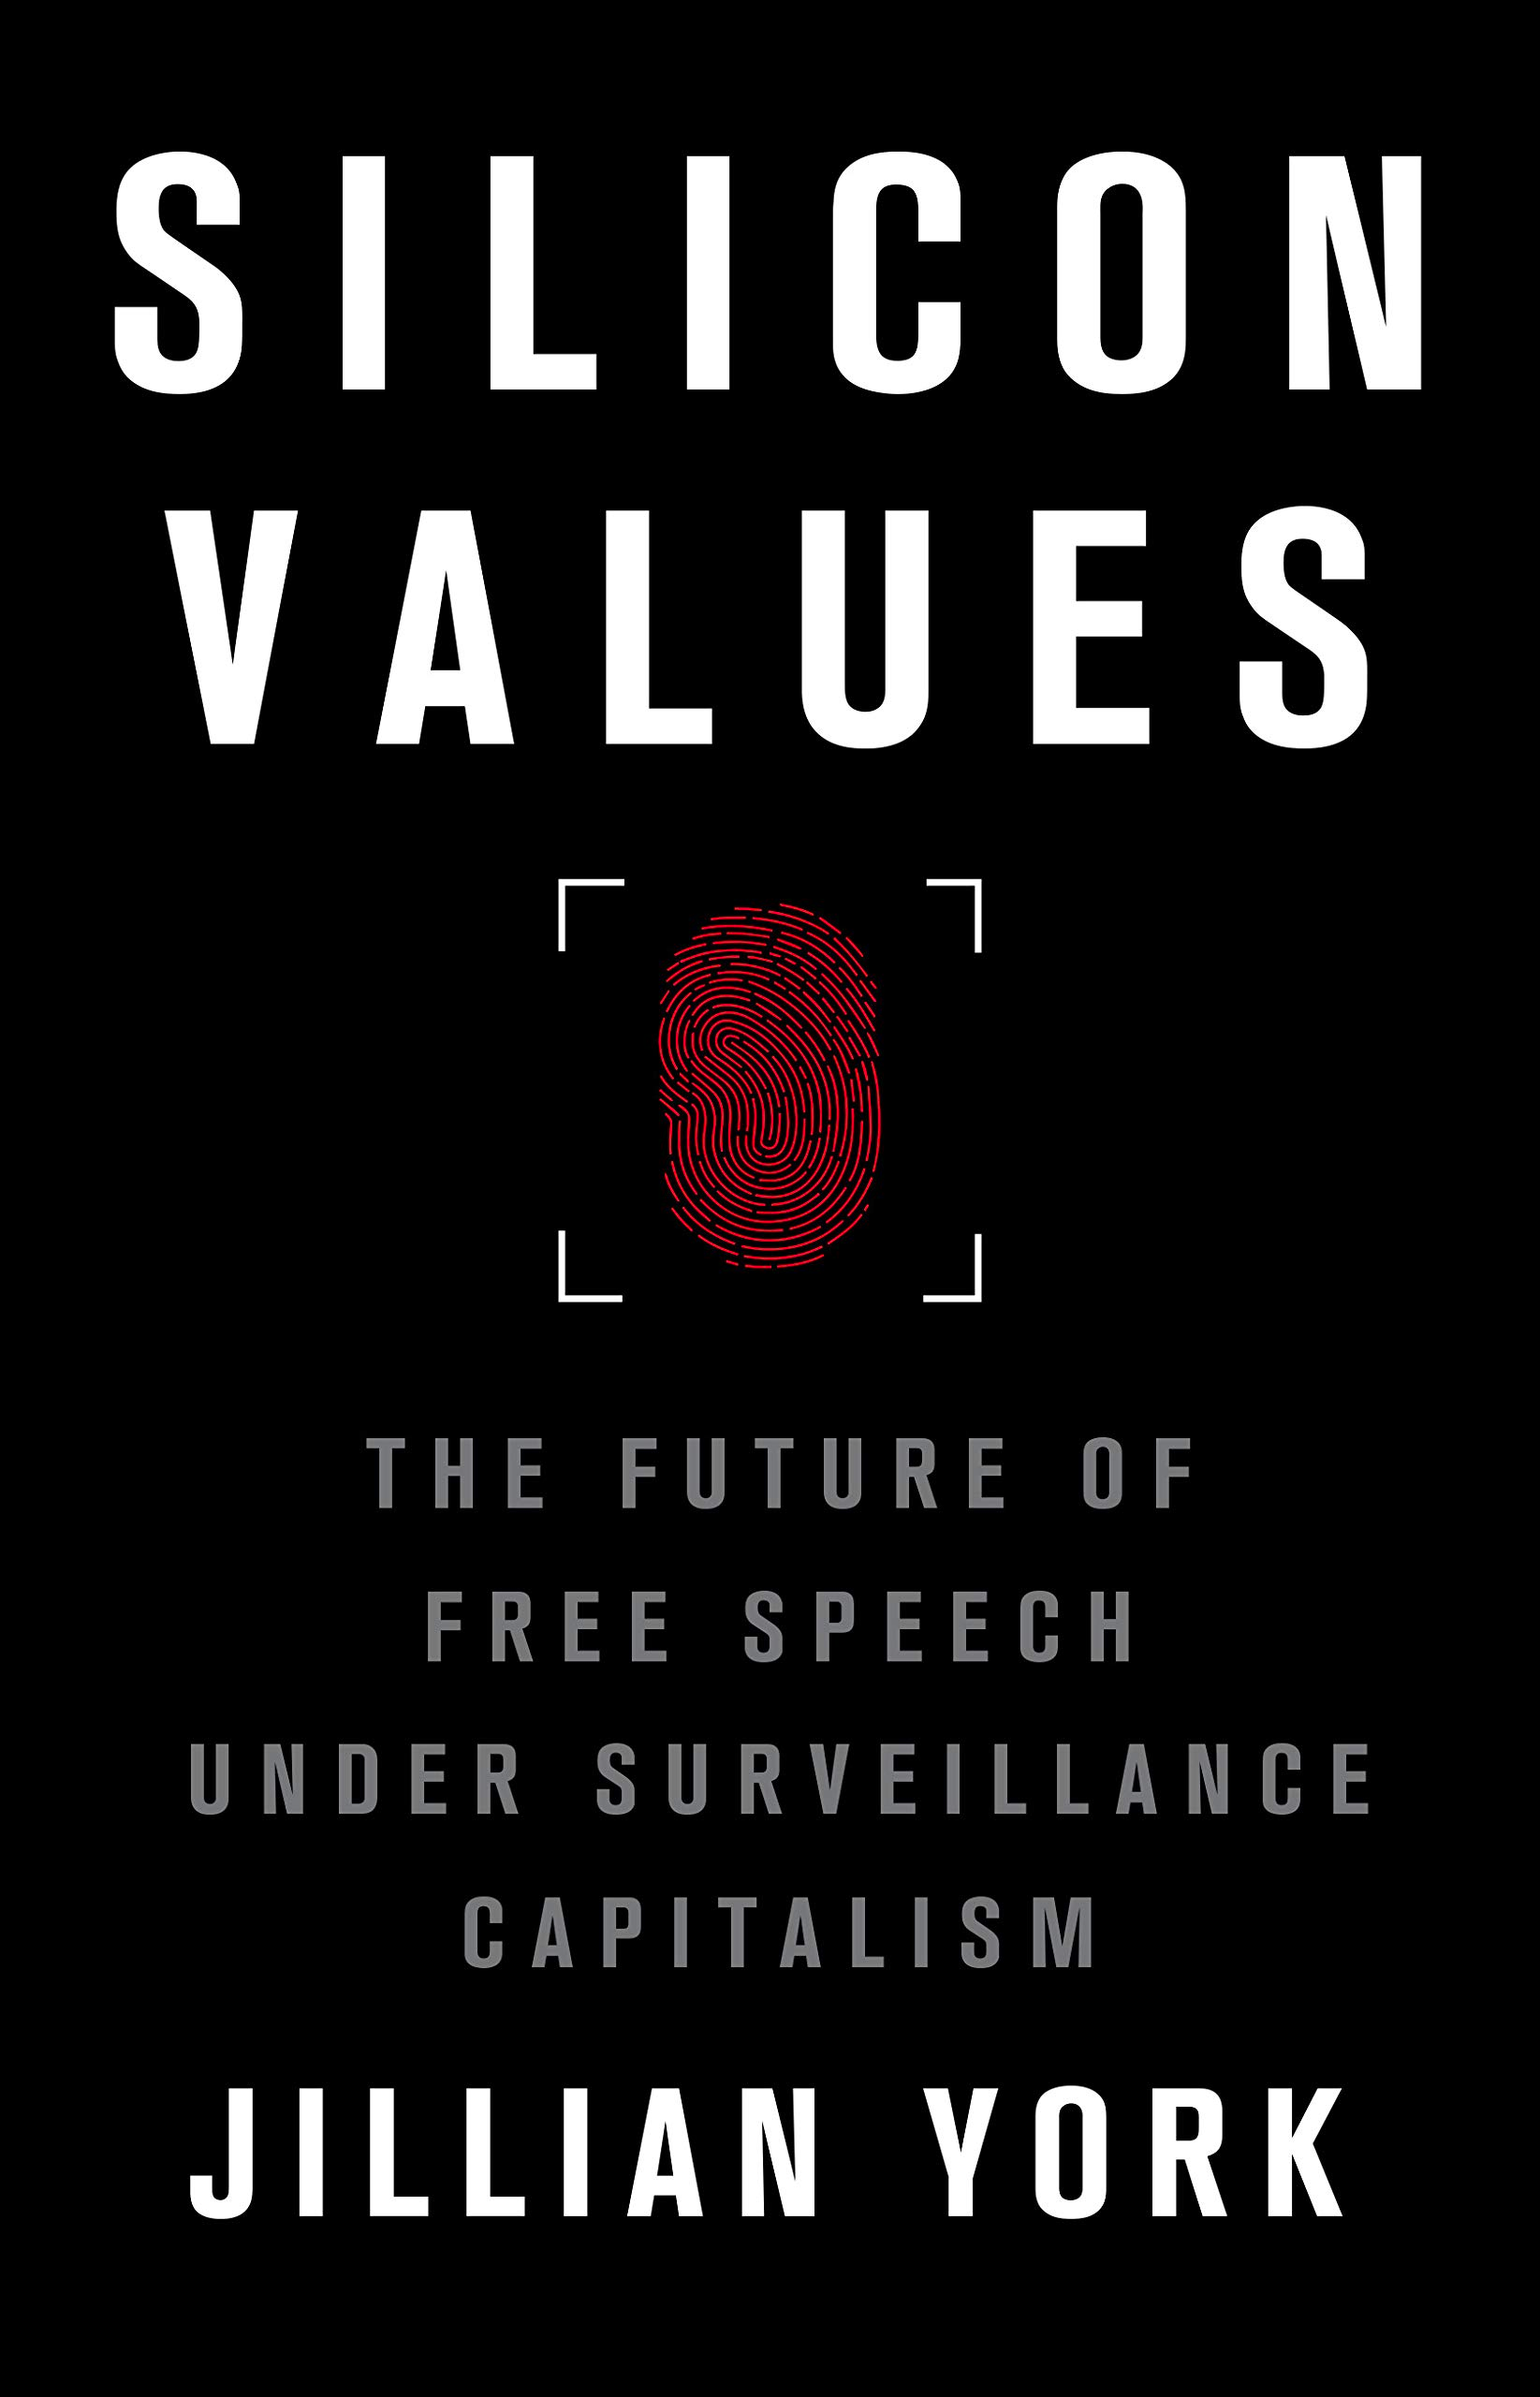 Cover of "Silicon Values" by Jillian York. A red fingerprint surrounded by the corners of a rectangle, indicating a biometric scan